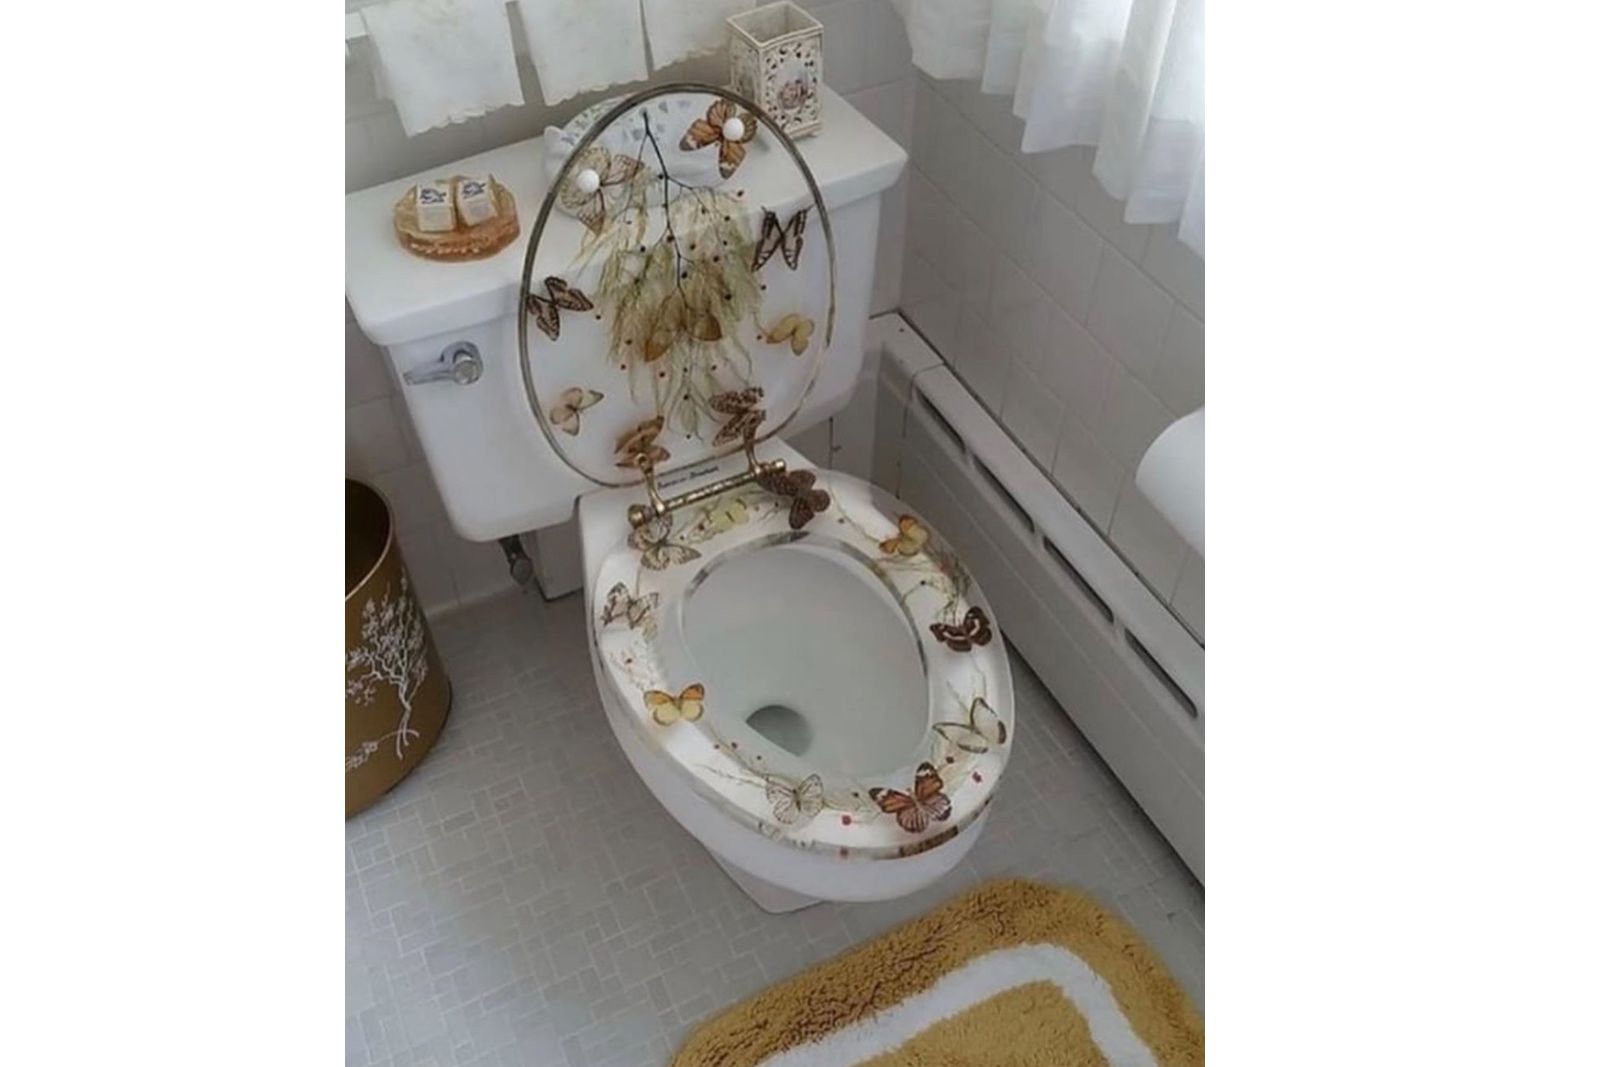 These Interior Decor Disasters Will Leave You Cringing image 1